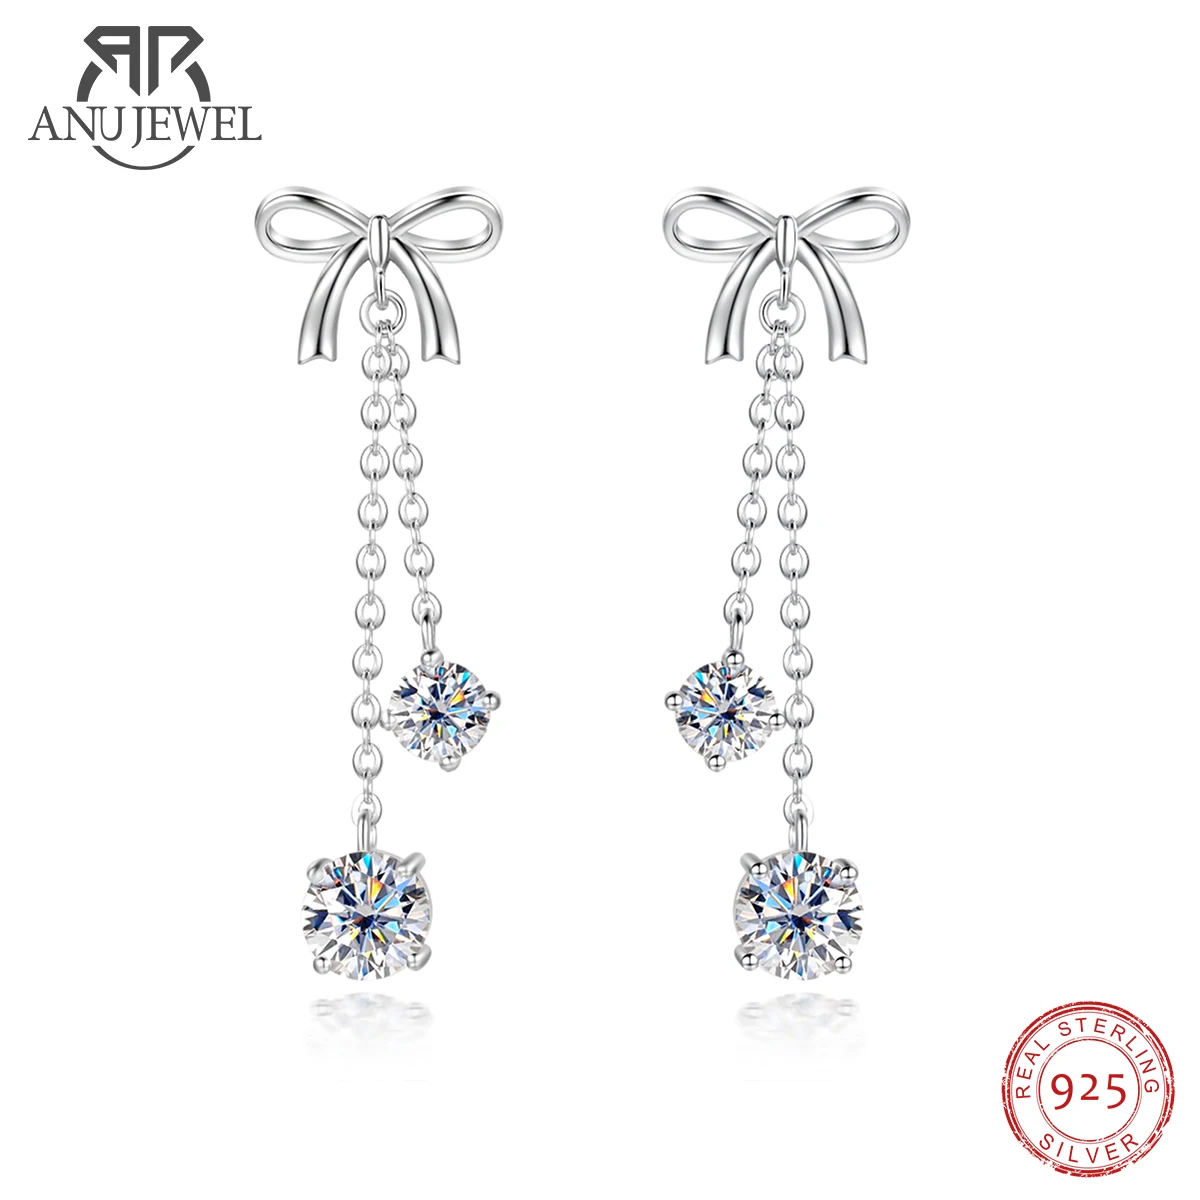 AnuJewel 3cttw D Color Moissanite Diamond Bow Drop Earrings 925 Sterling Silver Stud Earrings Charm Jewelry Wholesale